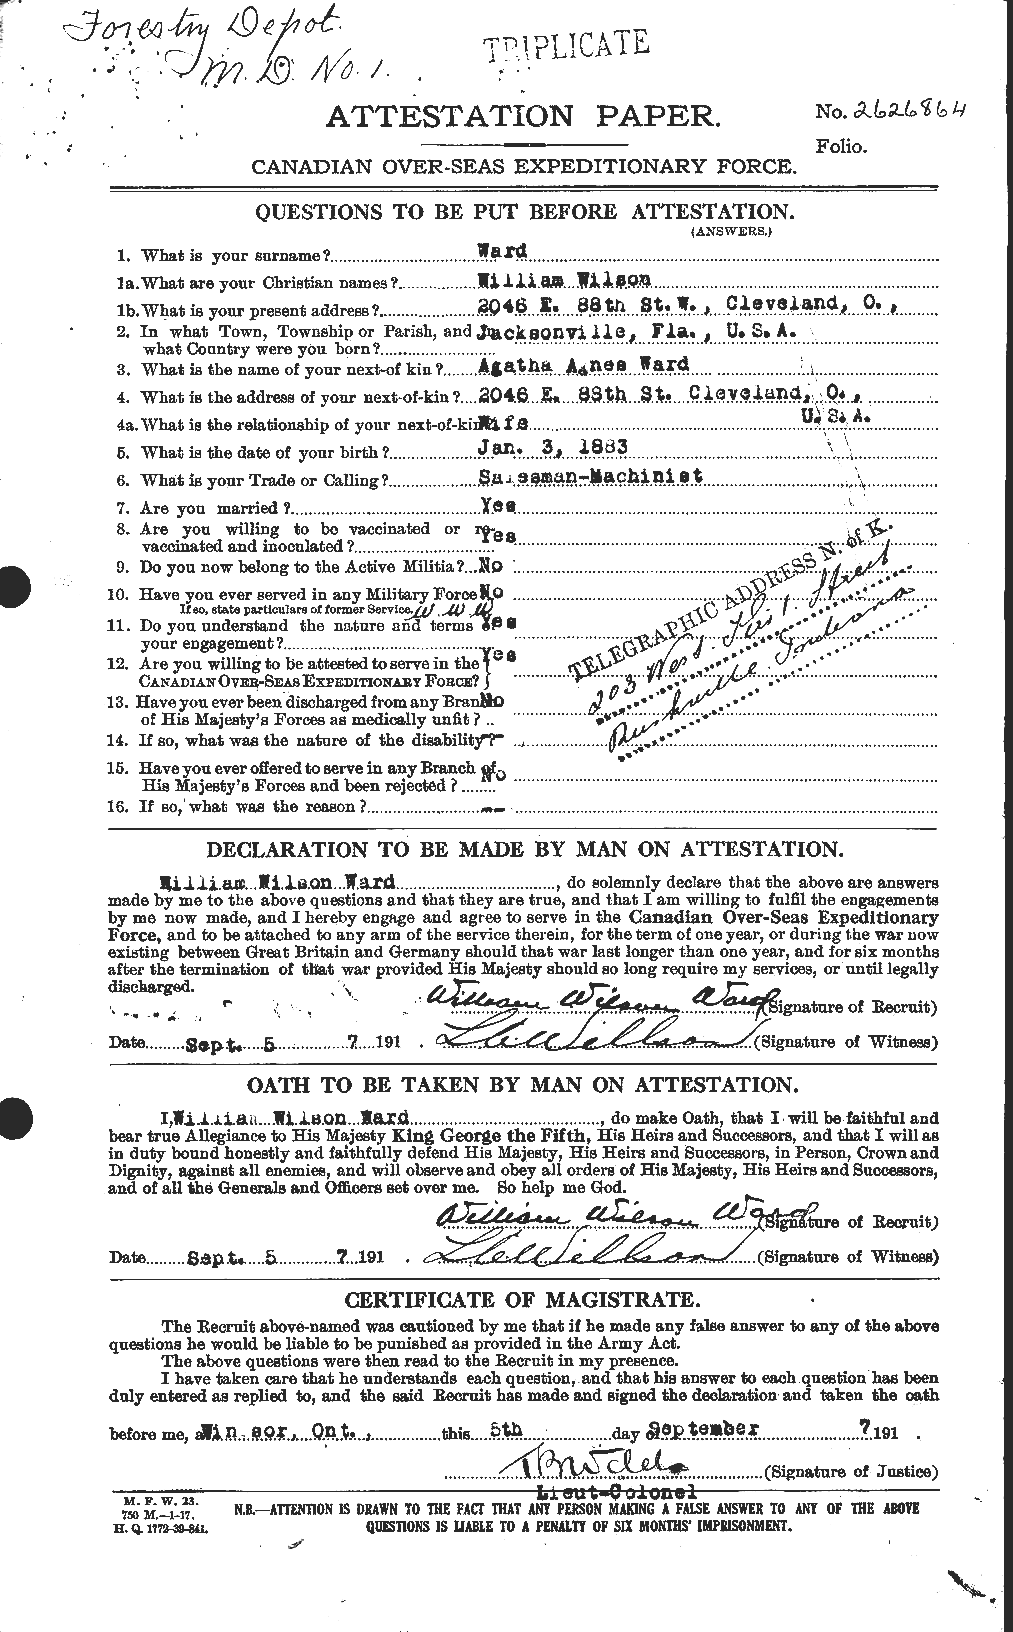 Personnel Records of the First World War - CEF 659852a